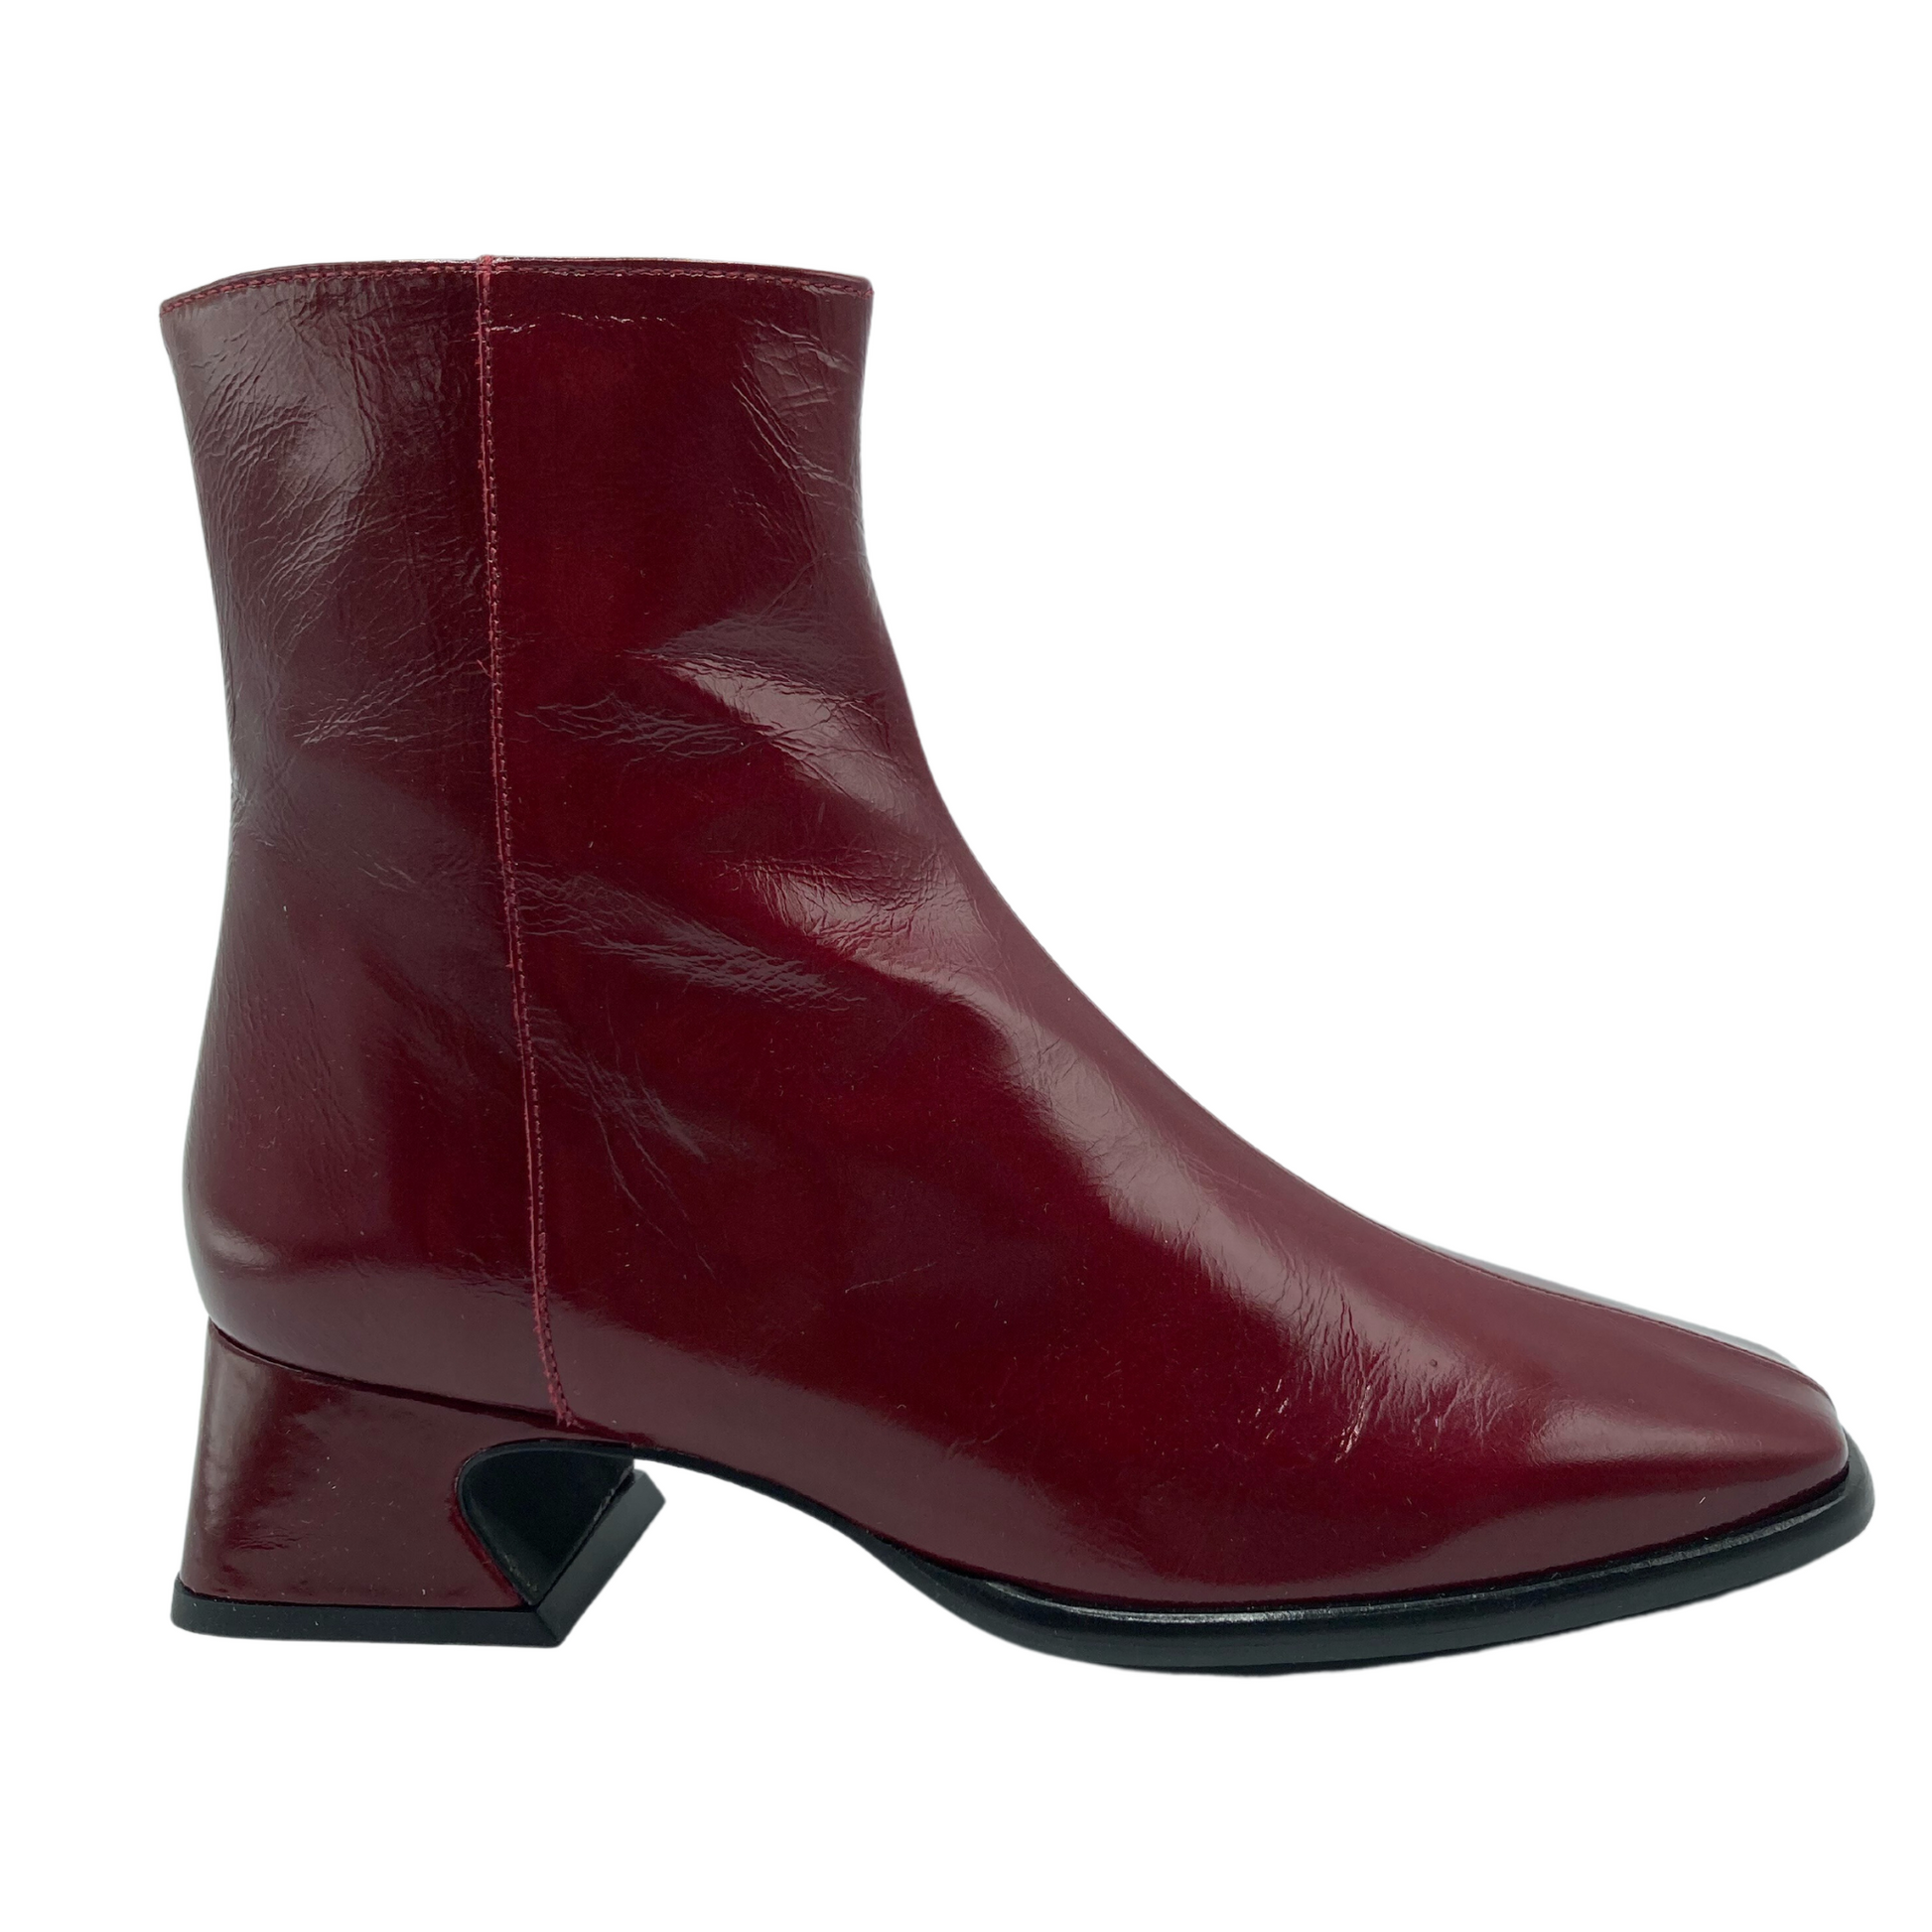 Right facing view of red leather short boot with flared heel and black sole